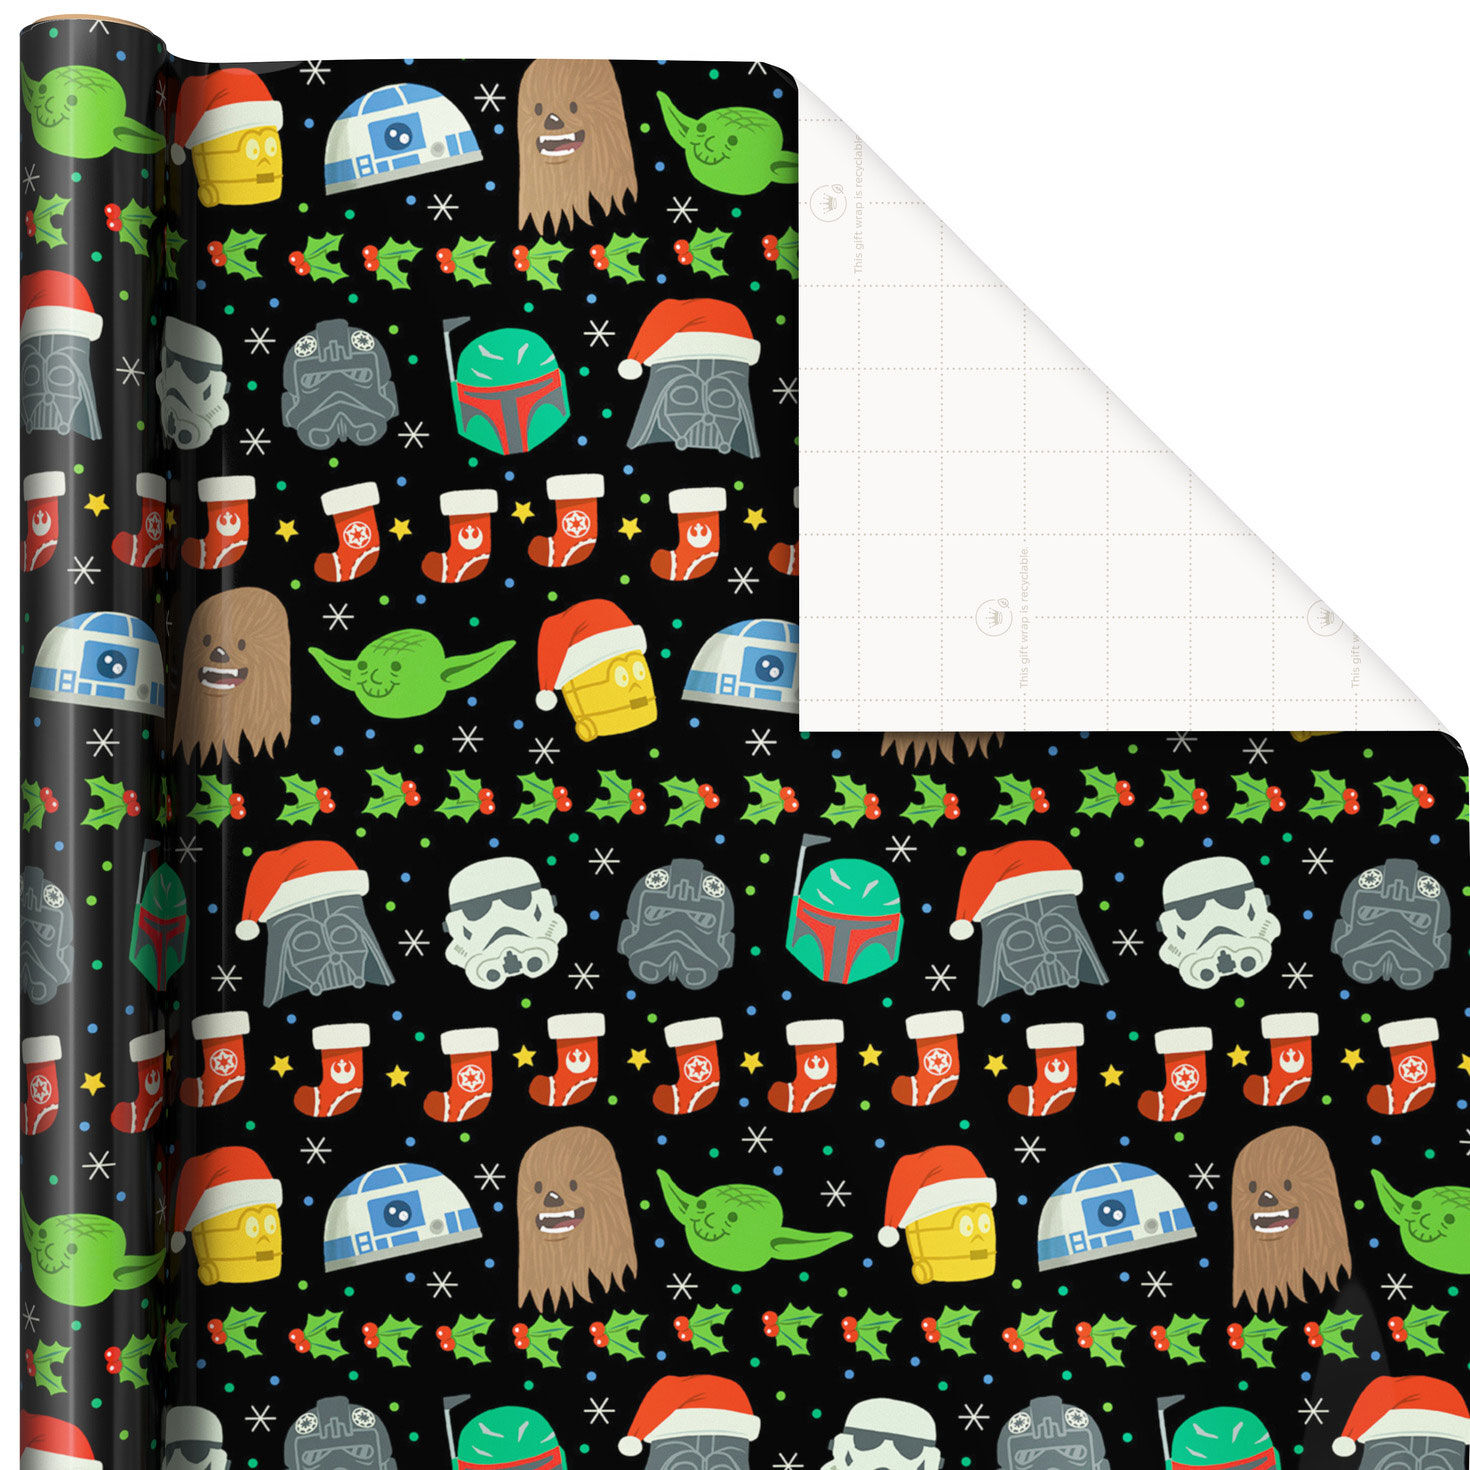 Star Wars Squares Jumbo Christmas Wrapping Paper Roll, We Don't Want to  Unwrap Presents Anymore — These Wrapping Papers Are Way Too Cute!